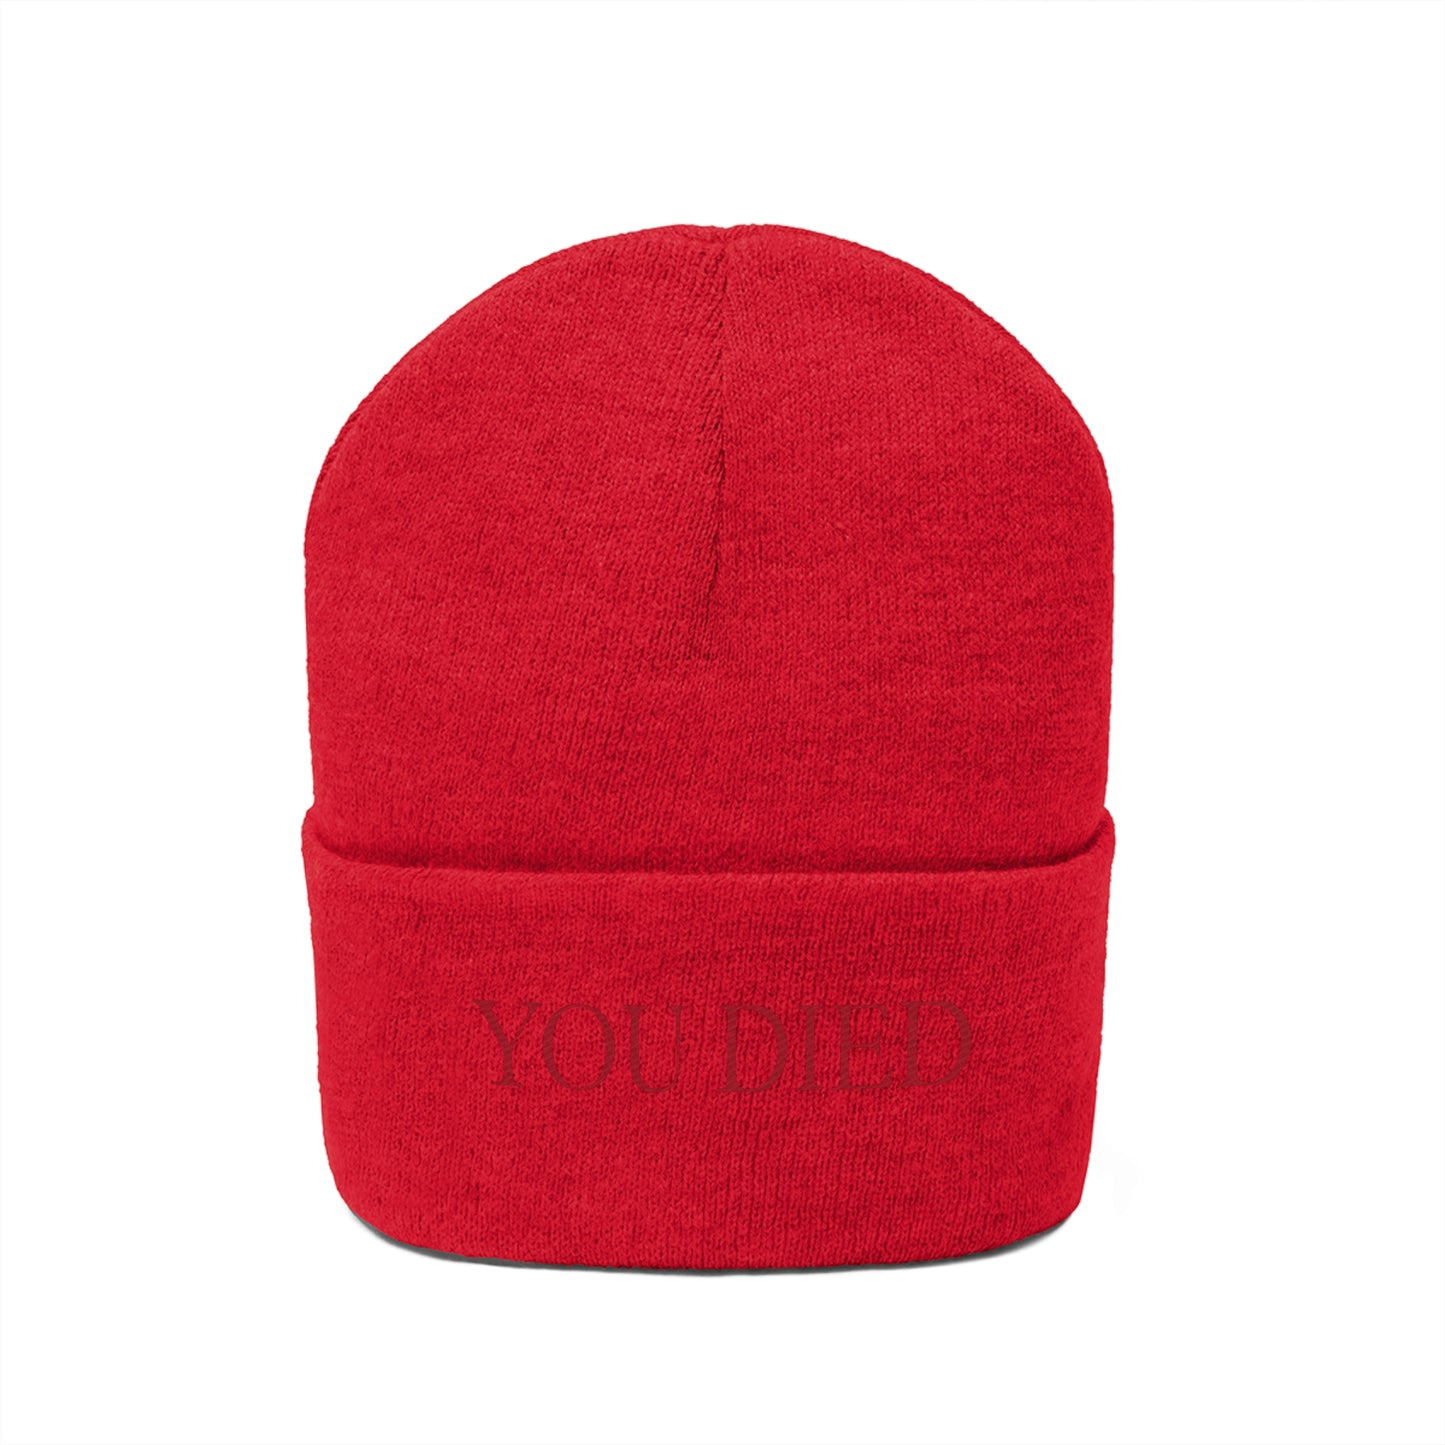 You died Embroidered Beanie Embroiderry